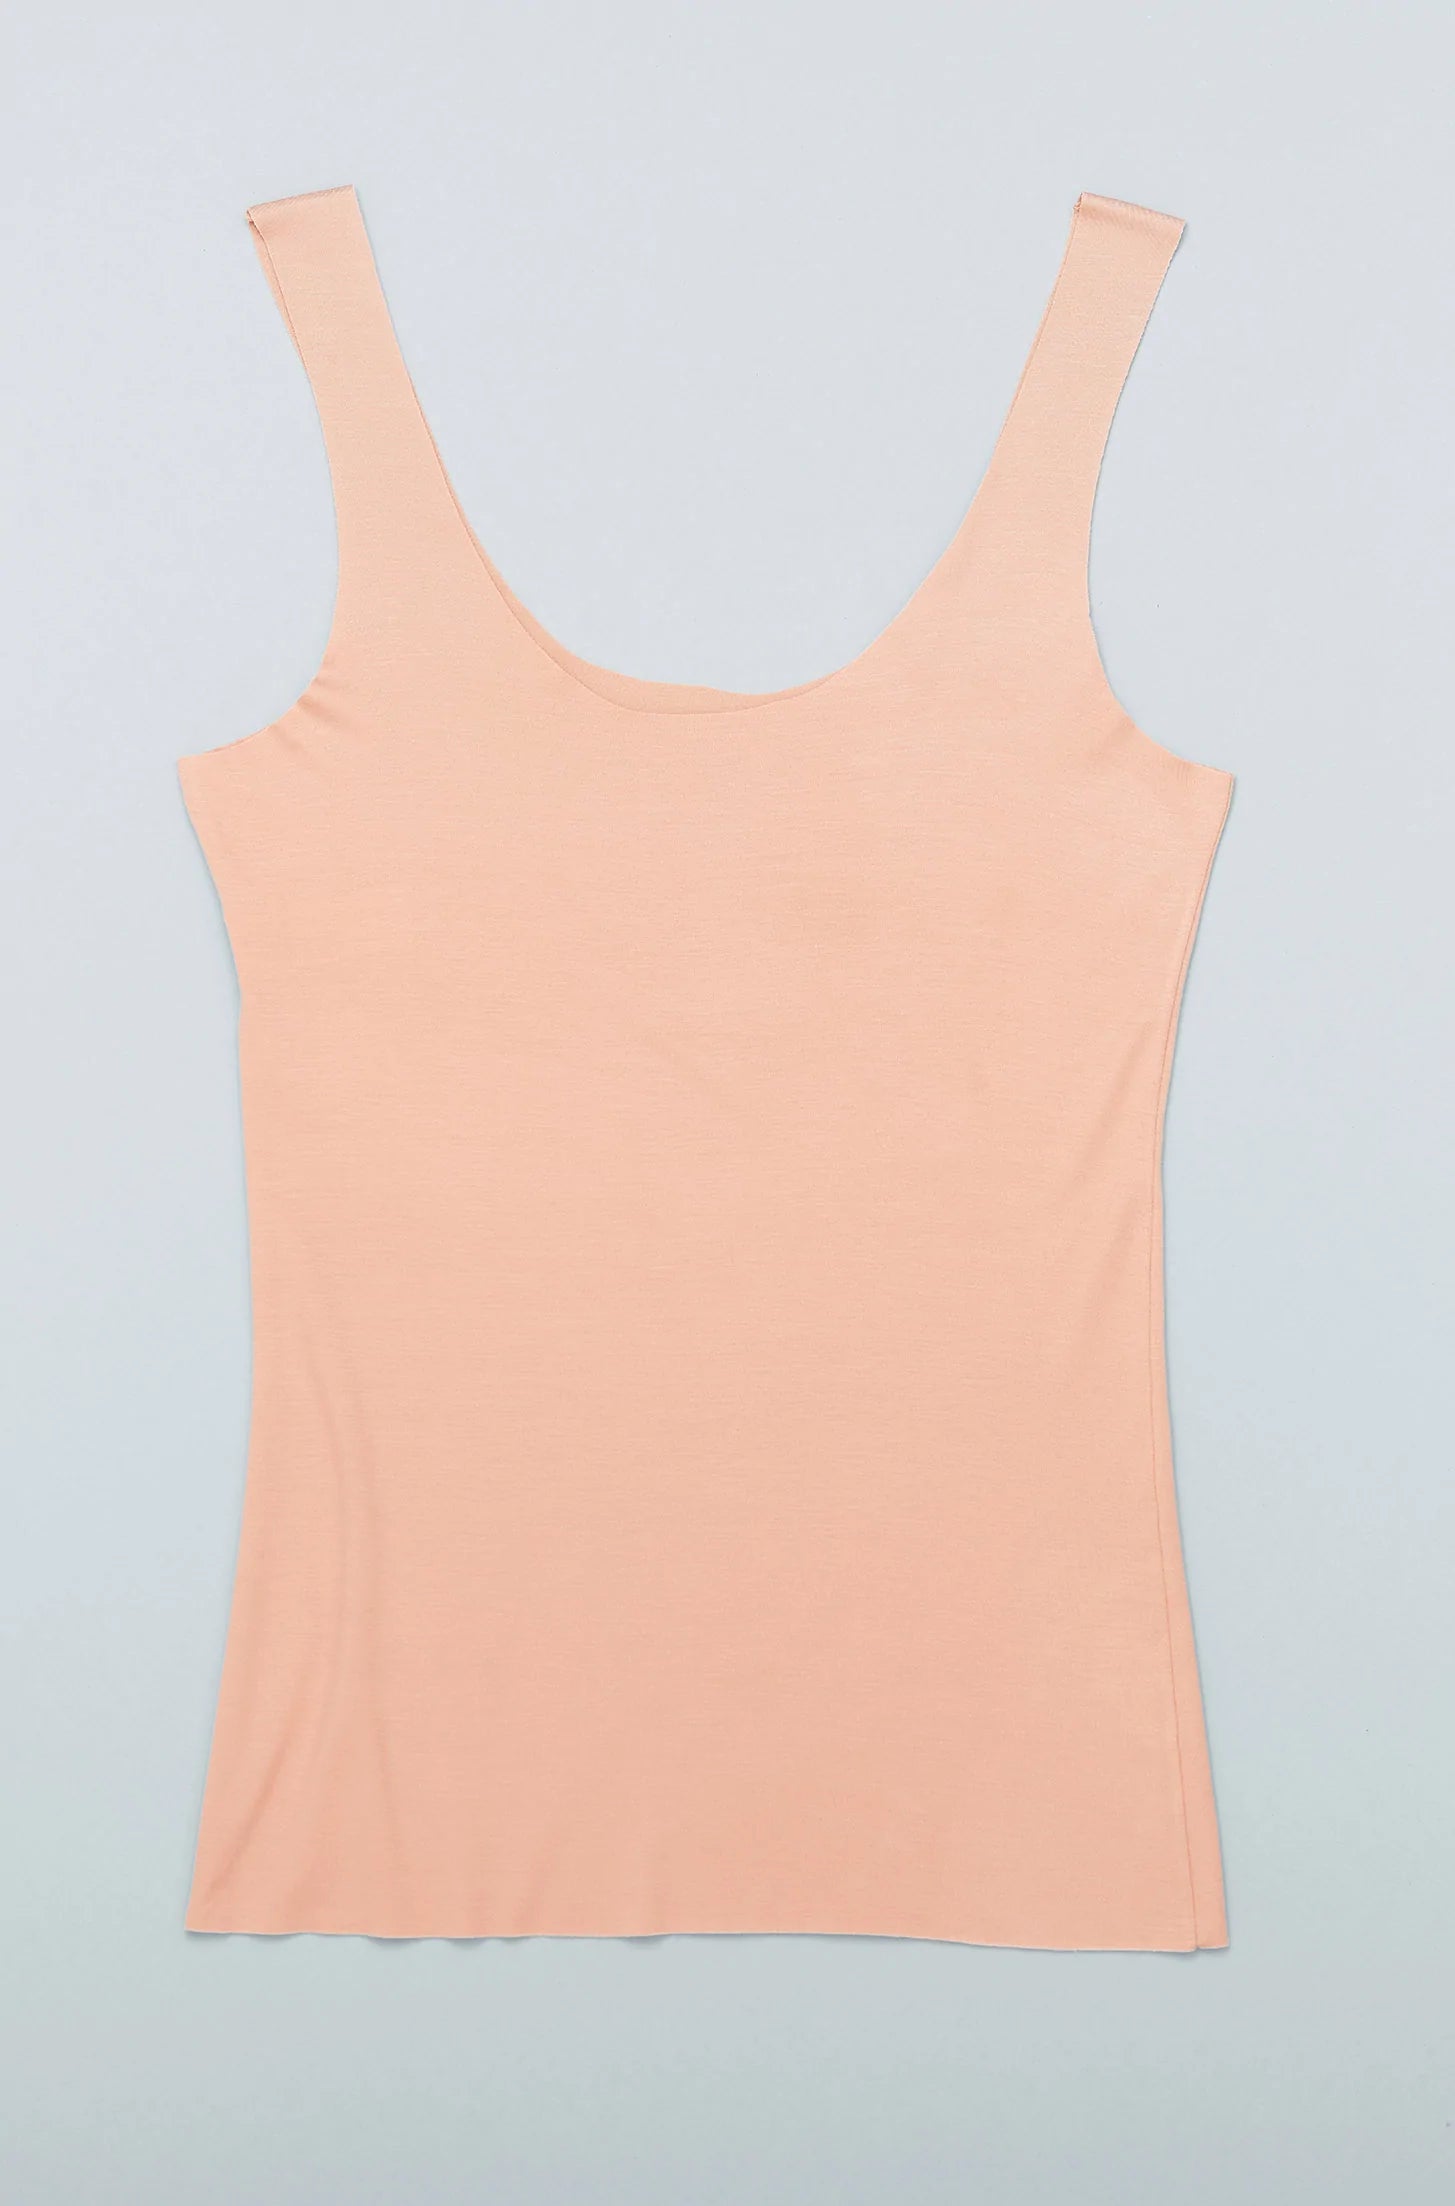 Skin-colored tank top made of Tencel &amp; Elastane from moi-basics